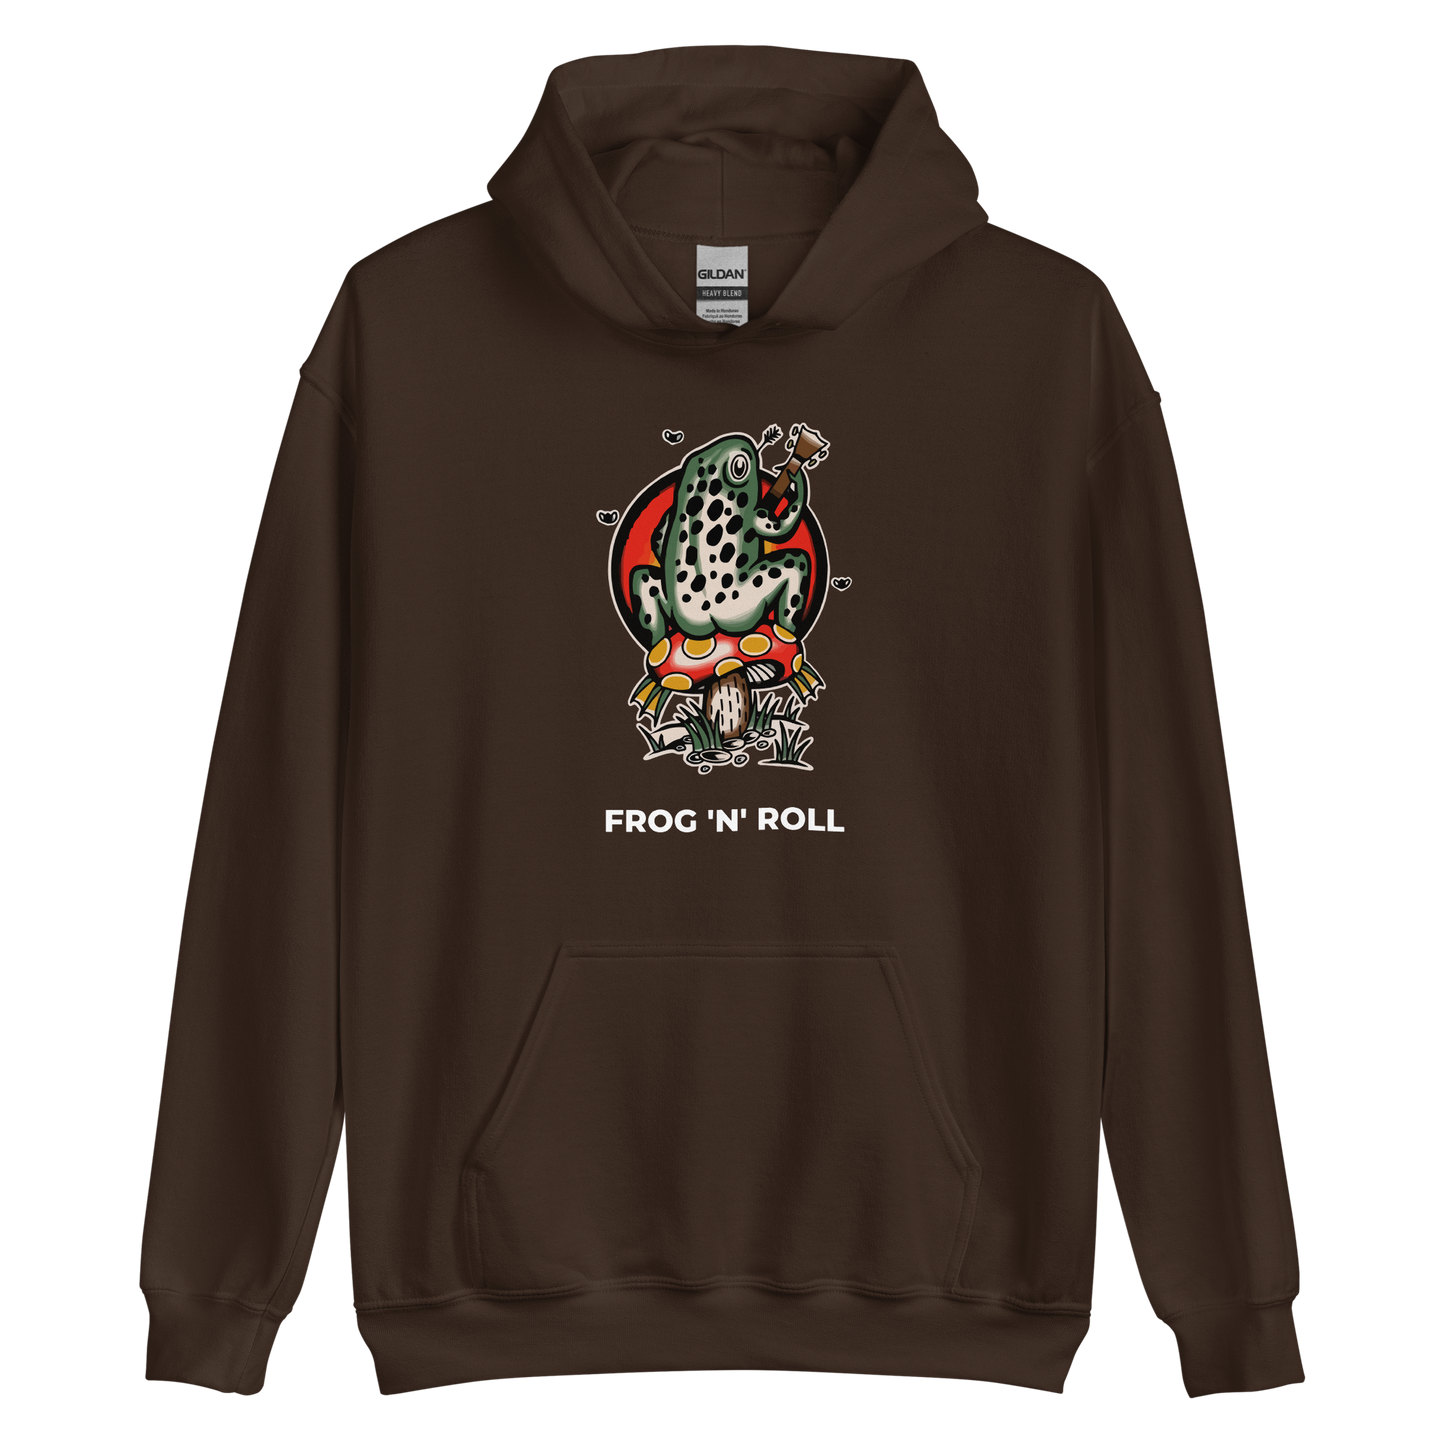 Dark Chocolate Frog Hoodie featuring the hilarious Frog 'n' Roll graphic on the chest - Funny Graphic Frog Hoodies - Boozy Fox